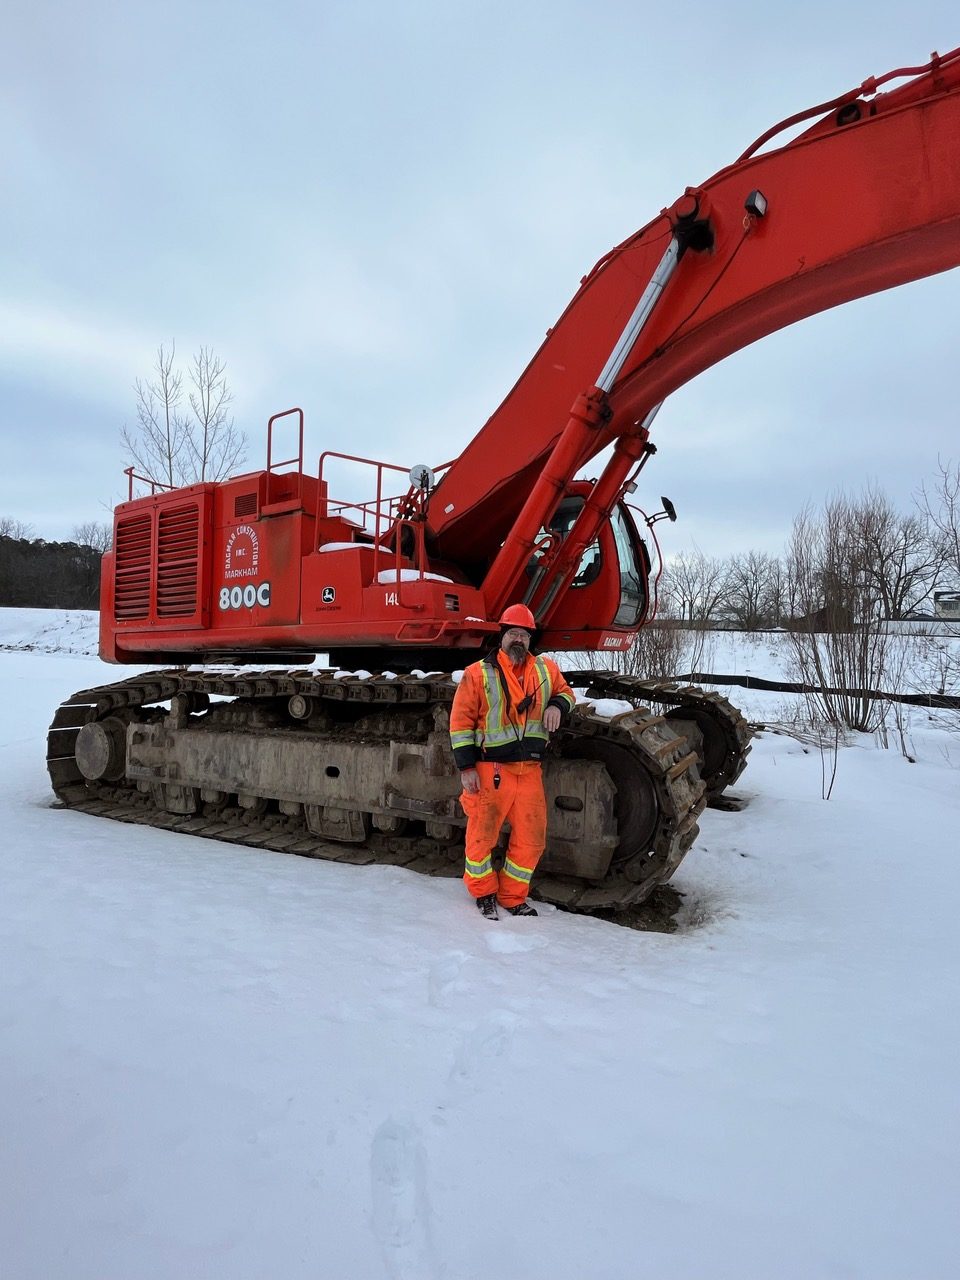 Member posing and leaning back on excavator